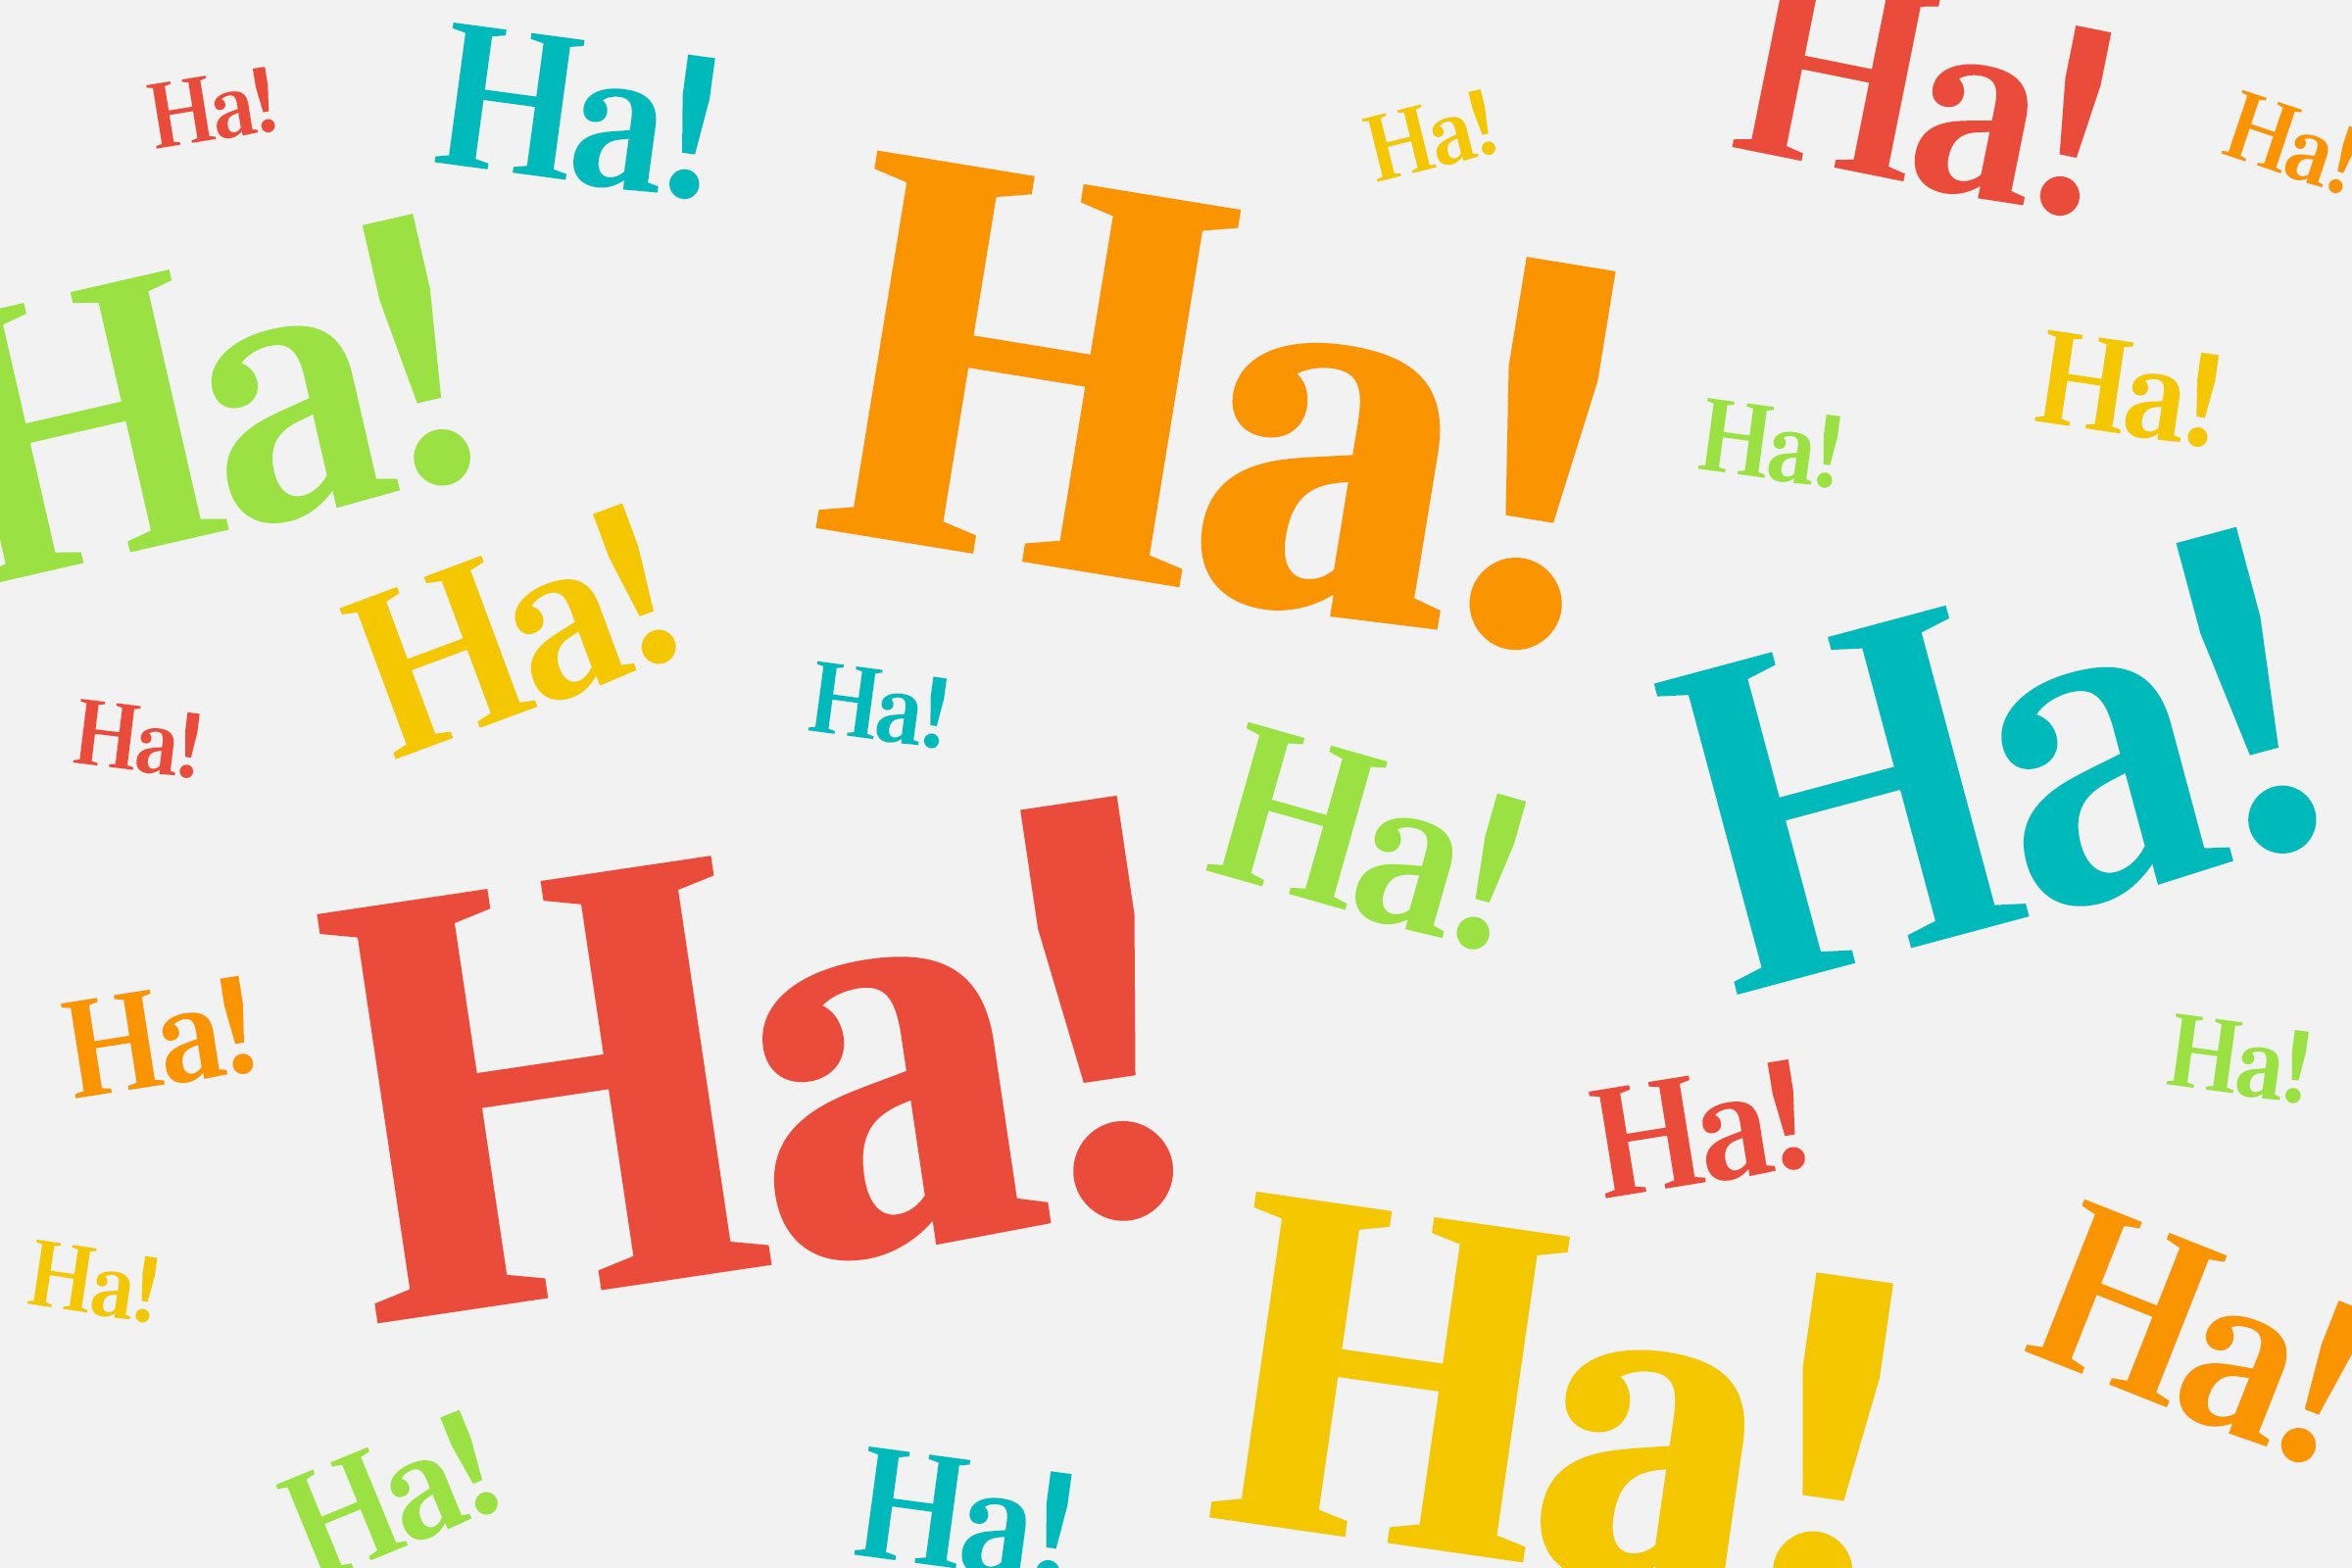 101 Short Jokes Anyone Can Remember | Reader's Digest